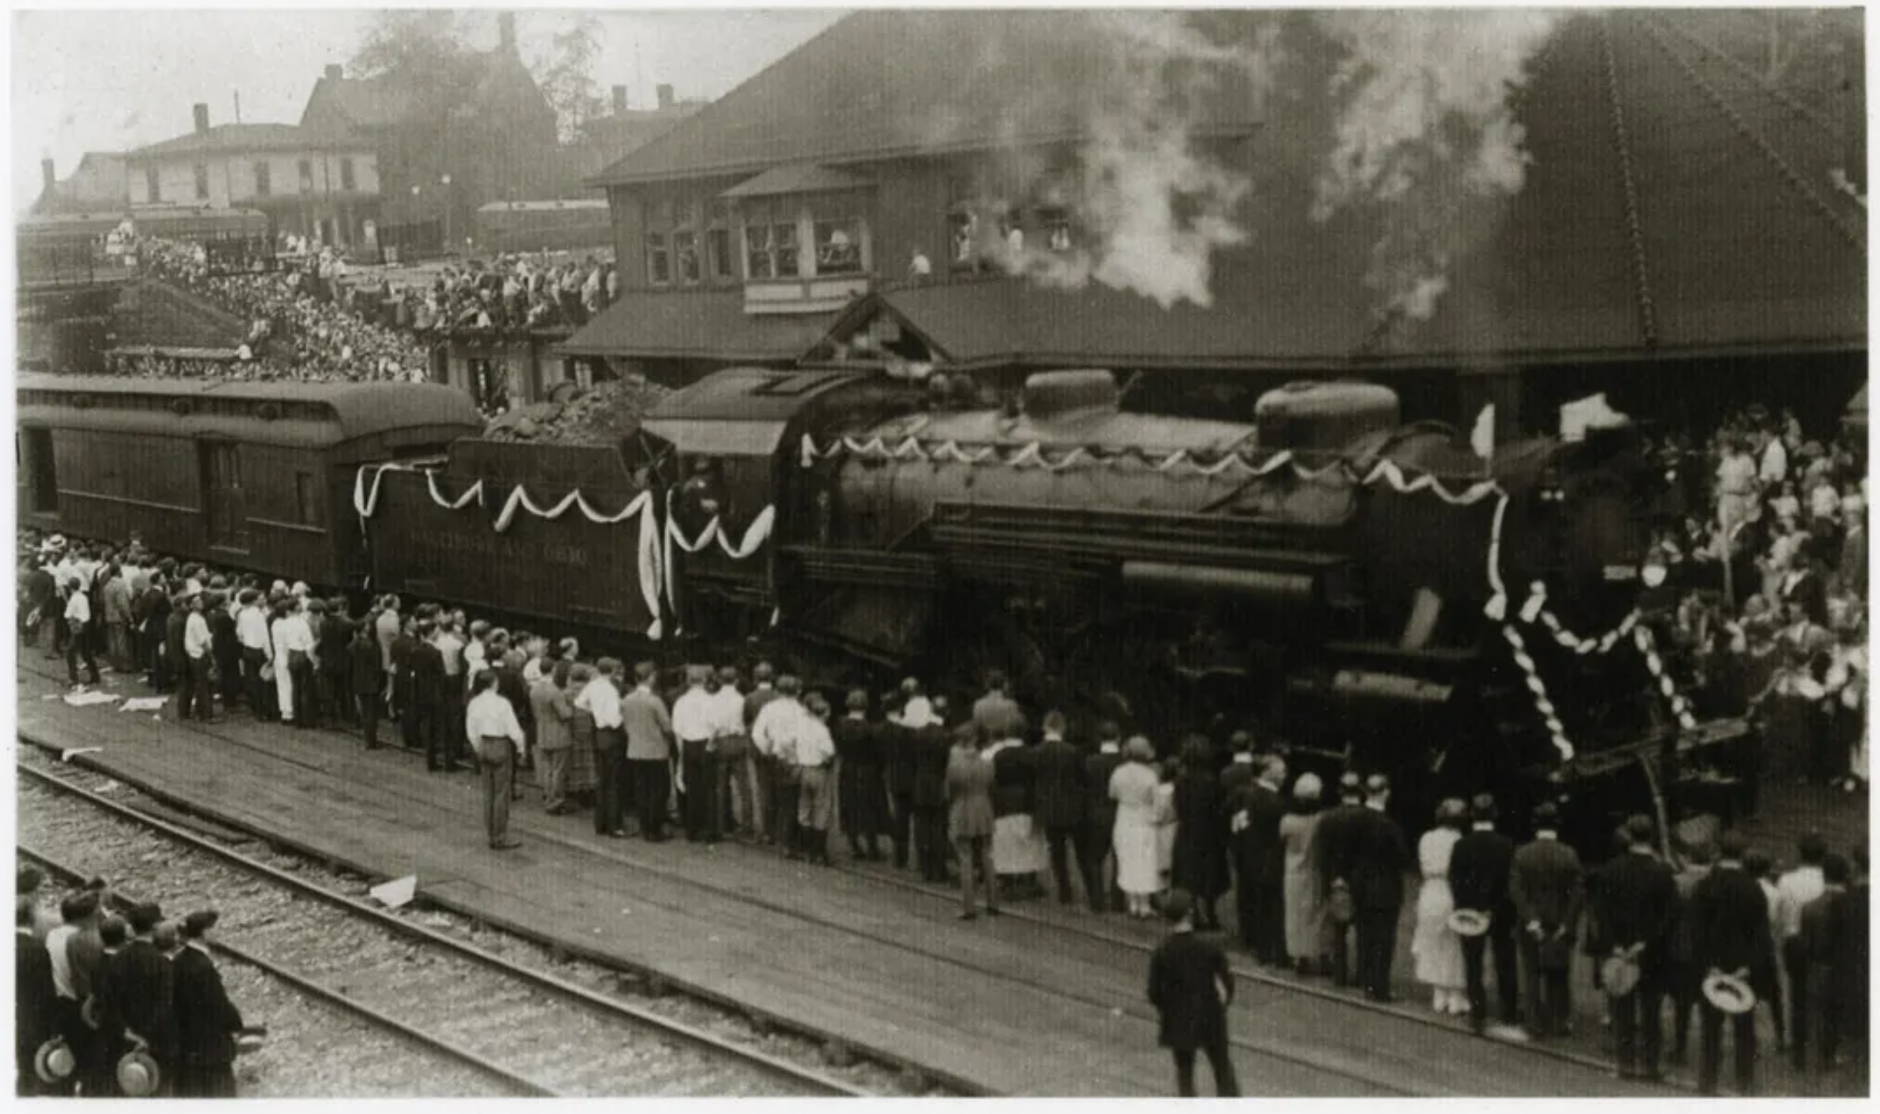 President Harding's funeral train, draped in black bunting, at the Union Depot at Akron, Ohio August 7th, 1923